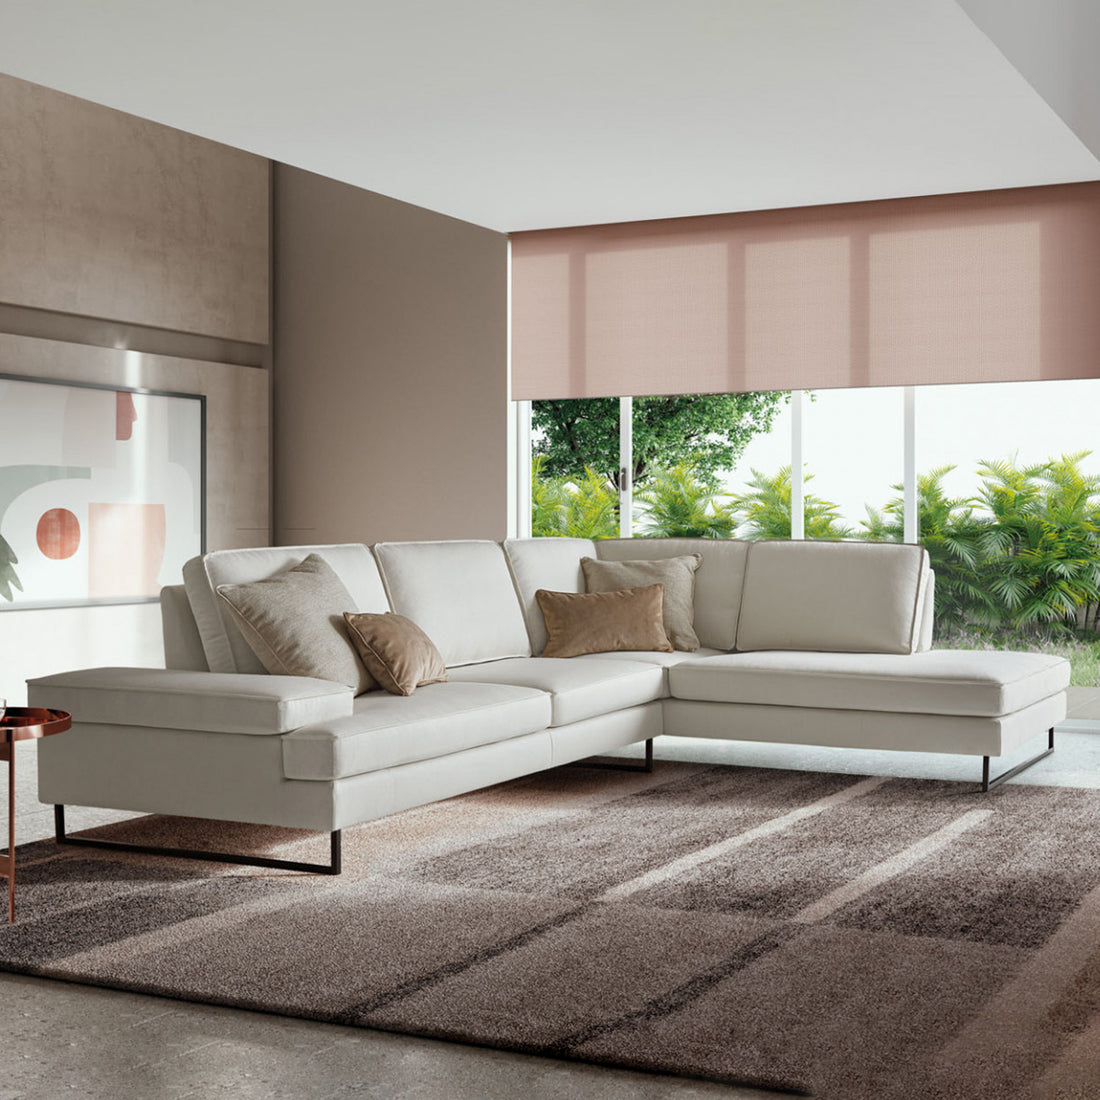 Why Modular/Sectional Sofa Is Appropriate For Small Spaces?